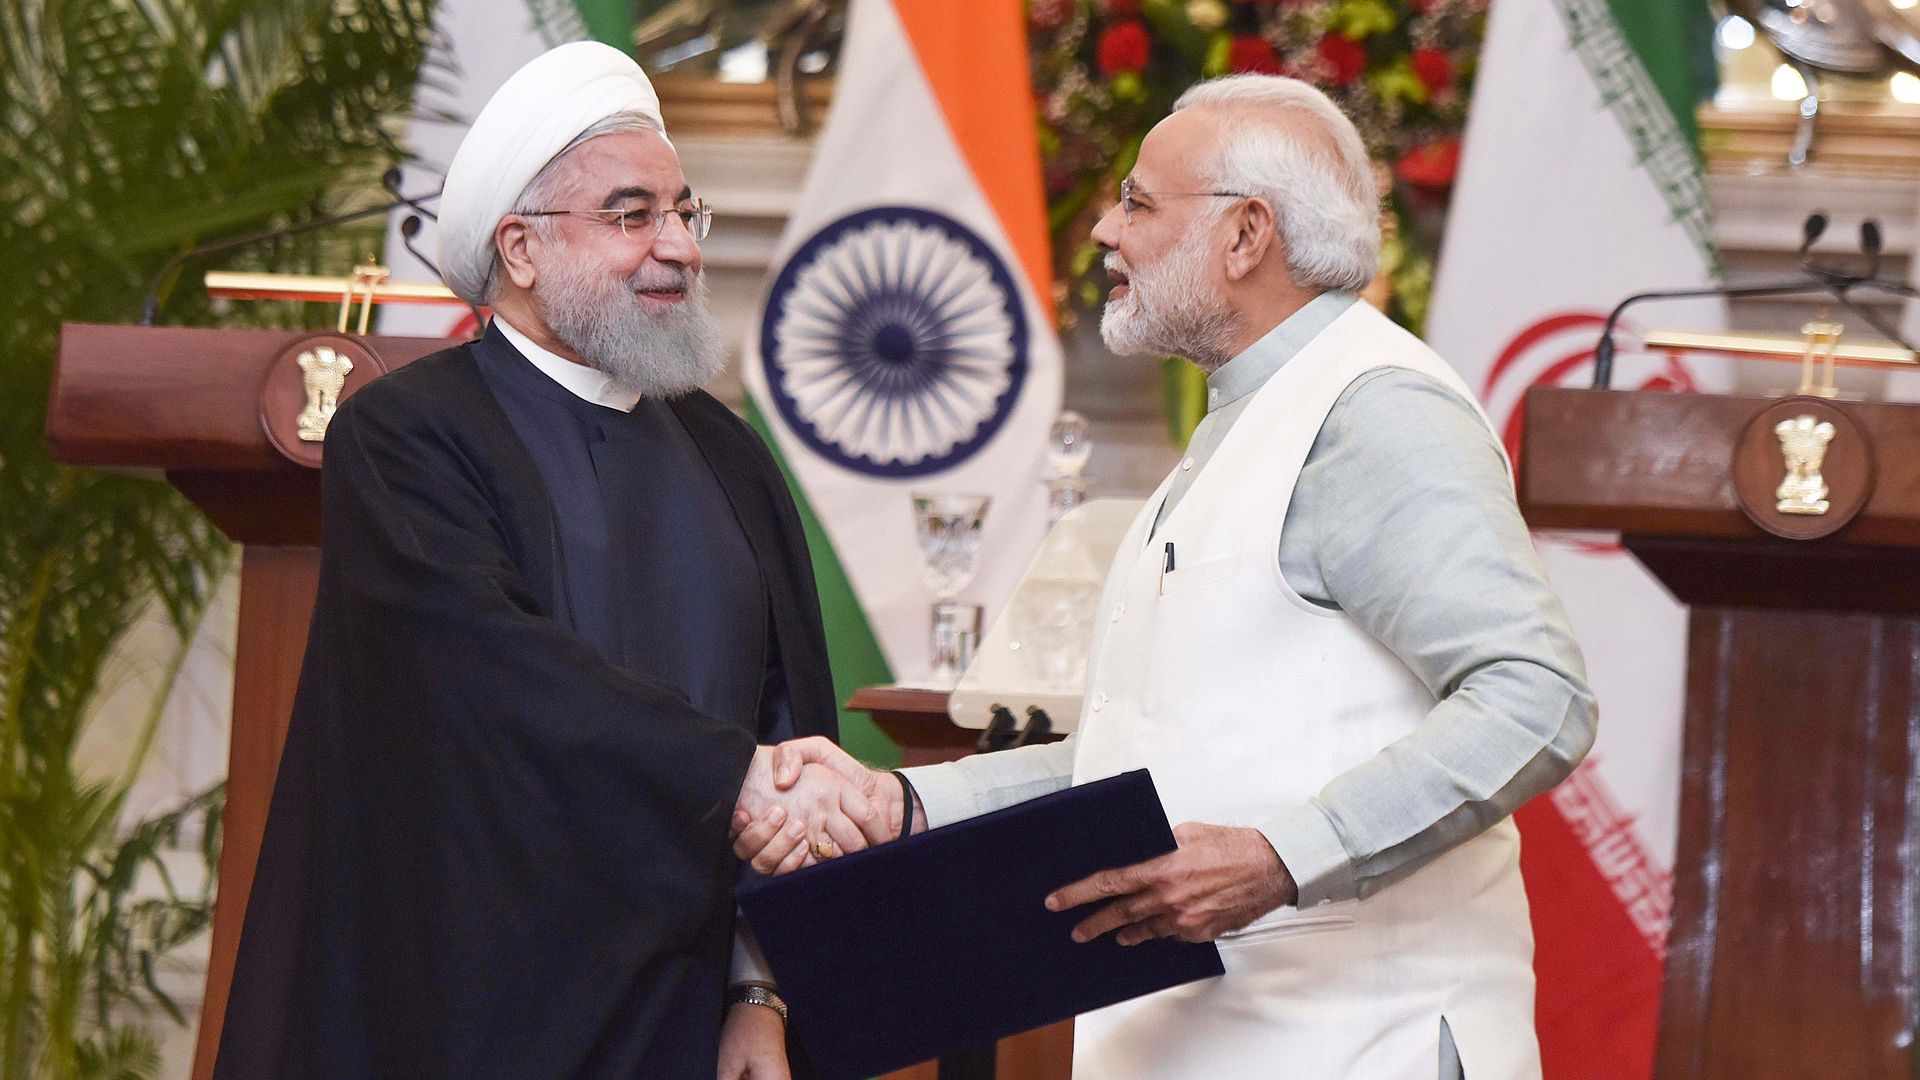 Iran President Dr. Hassan Rouhani with PM Narendra Modi after releasing commemorative stamp at Hyderabad House, on February 17, 2018 in New Delhi